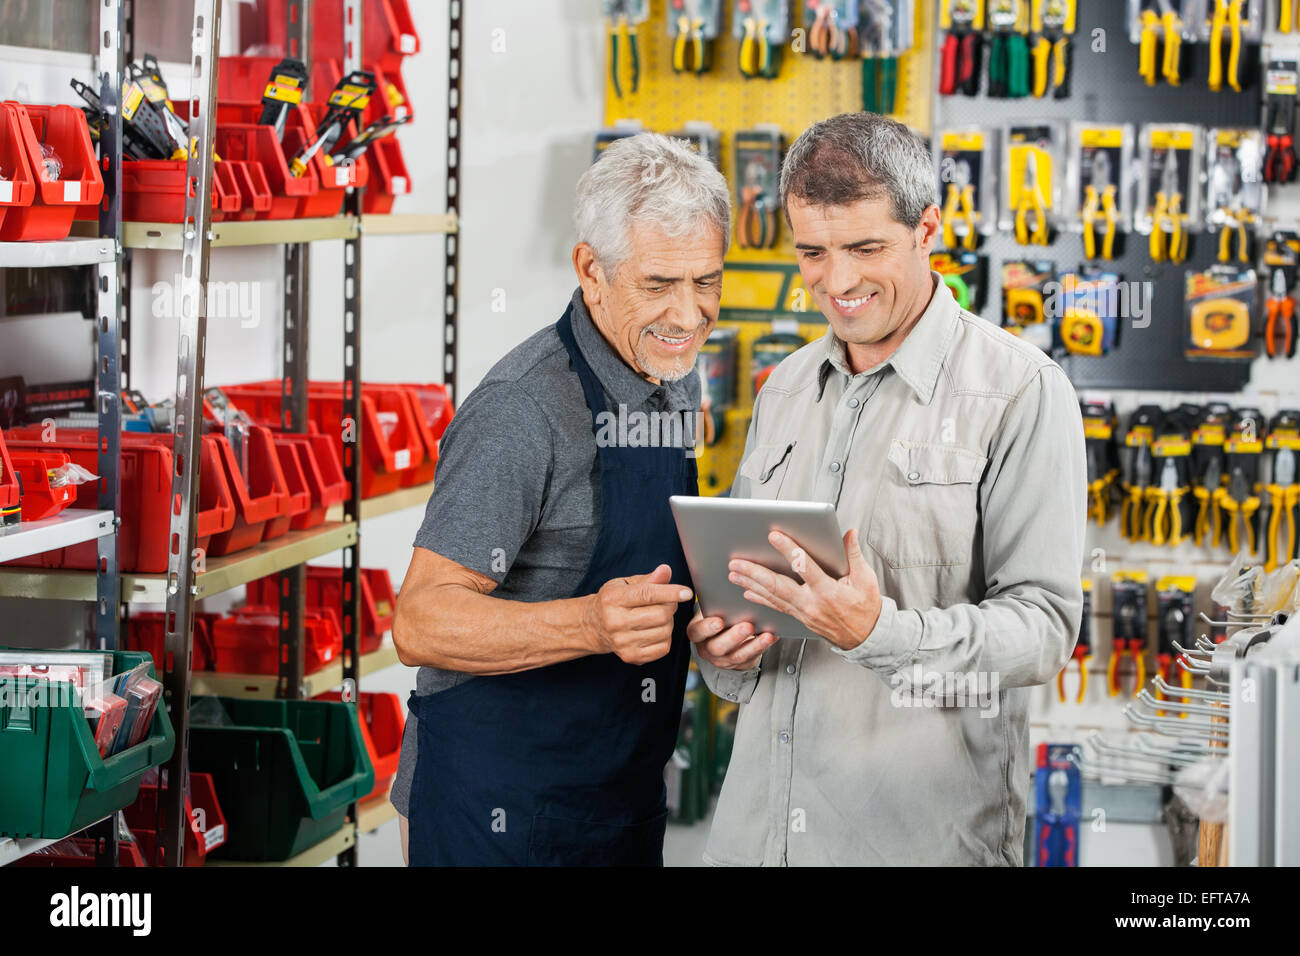 Salesperson And Customer Using Tablet Computer Stock Photo